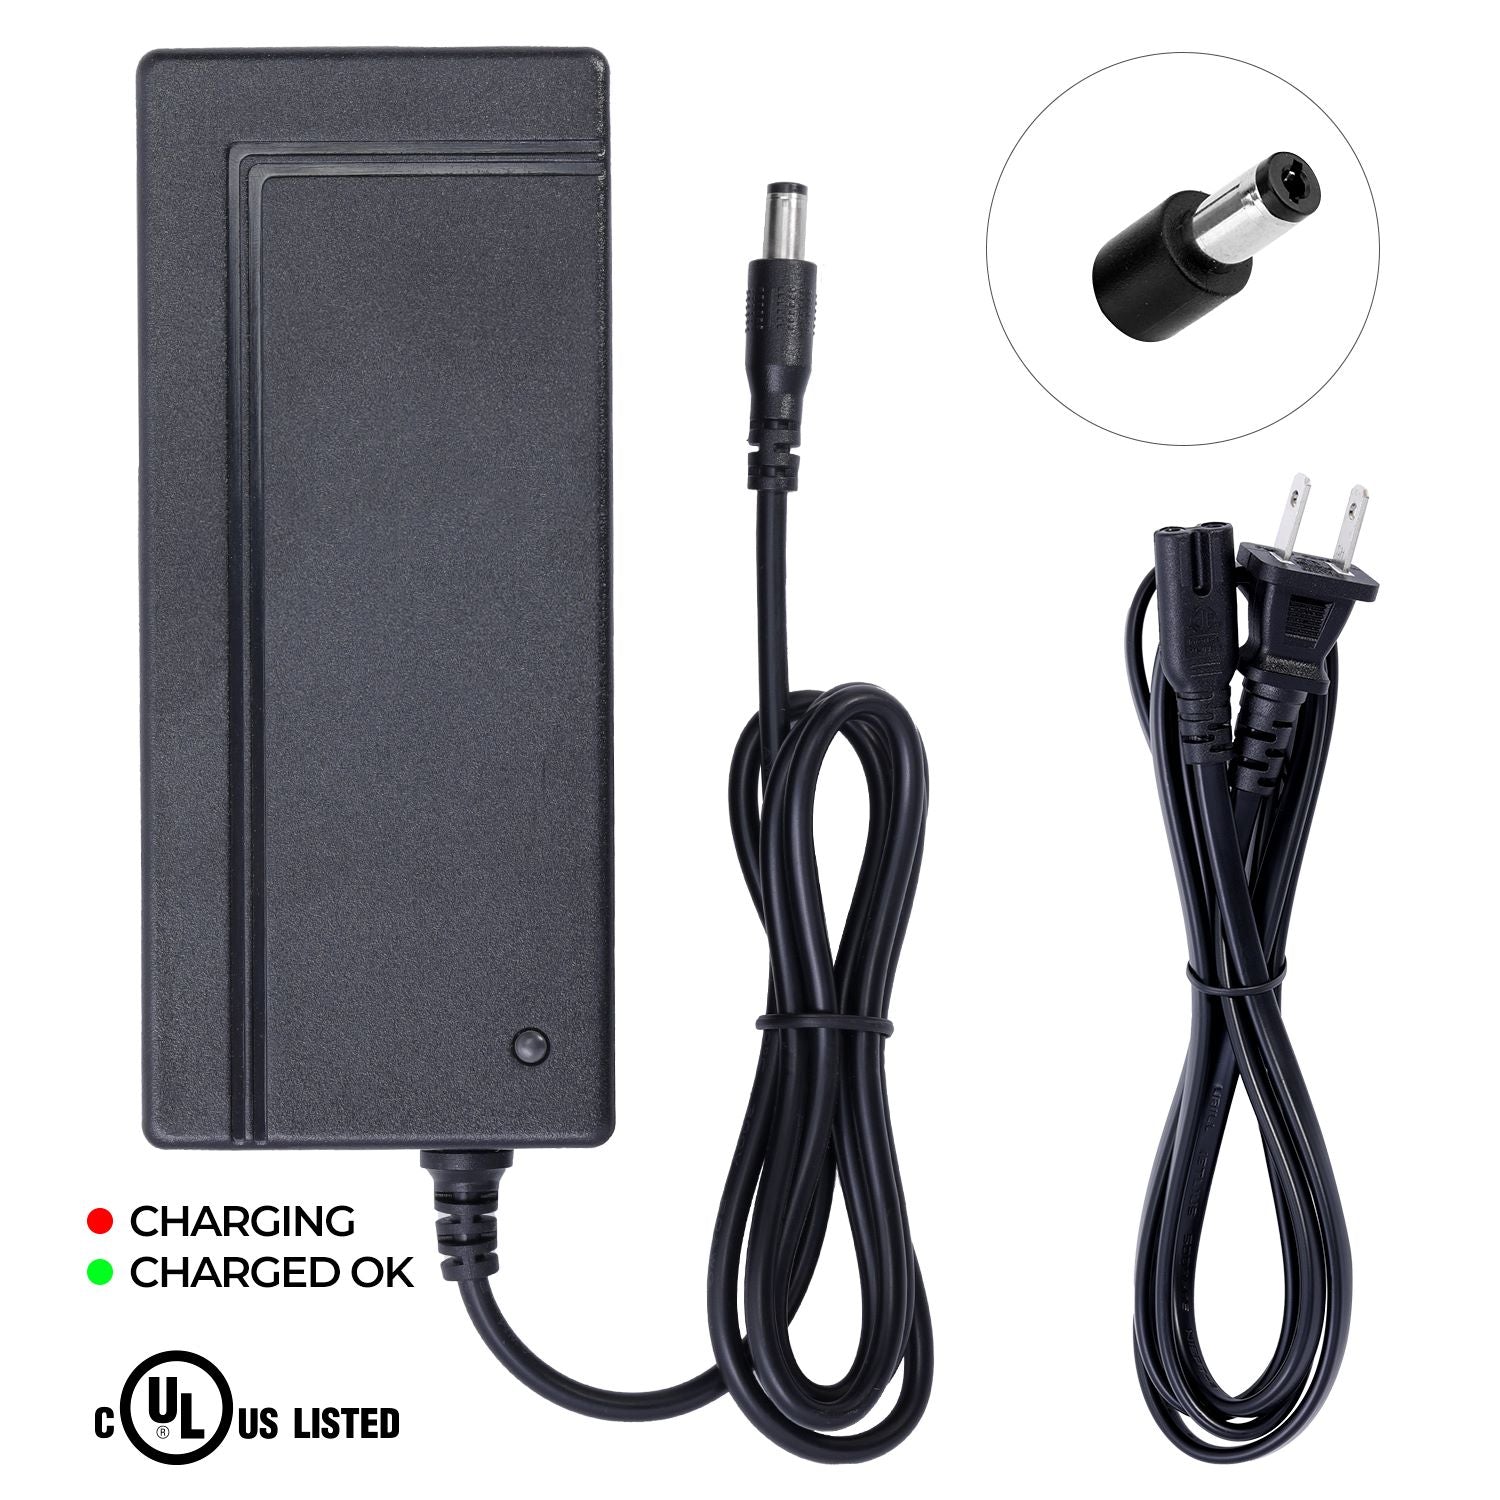 Adapter Charger for Wheelspeed Scooter Teen, WS1, WS1 Pro